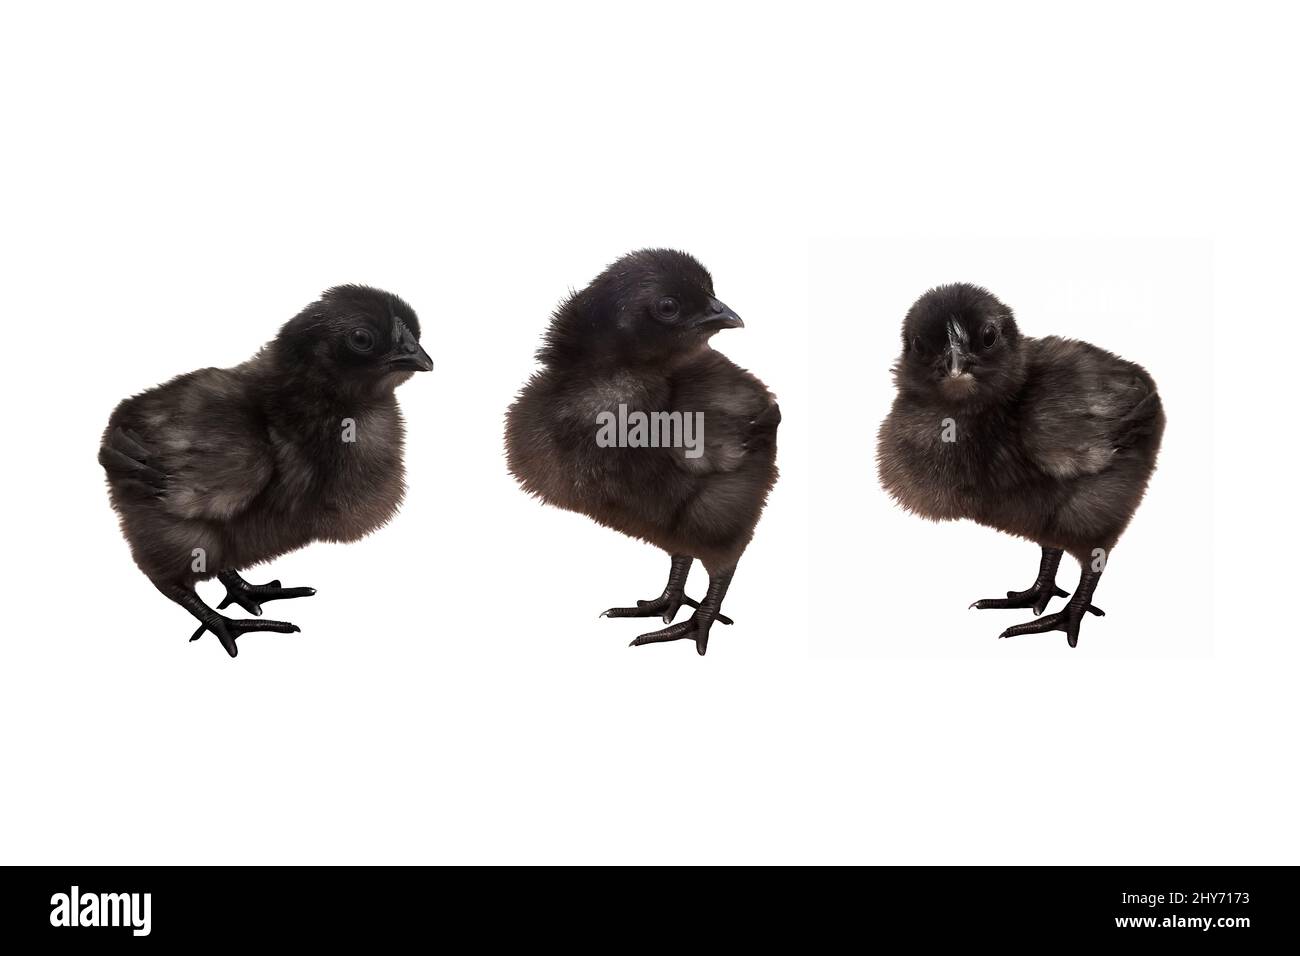 Three black chicks posing in front of a white background Stock Photo